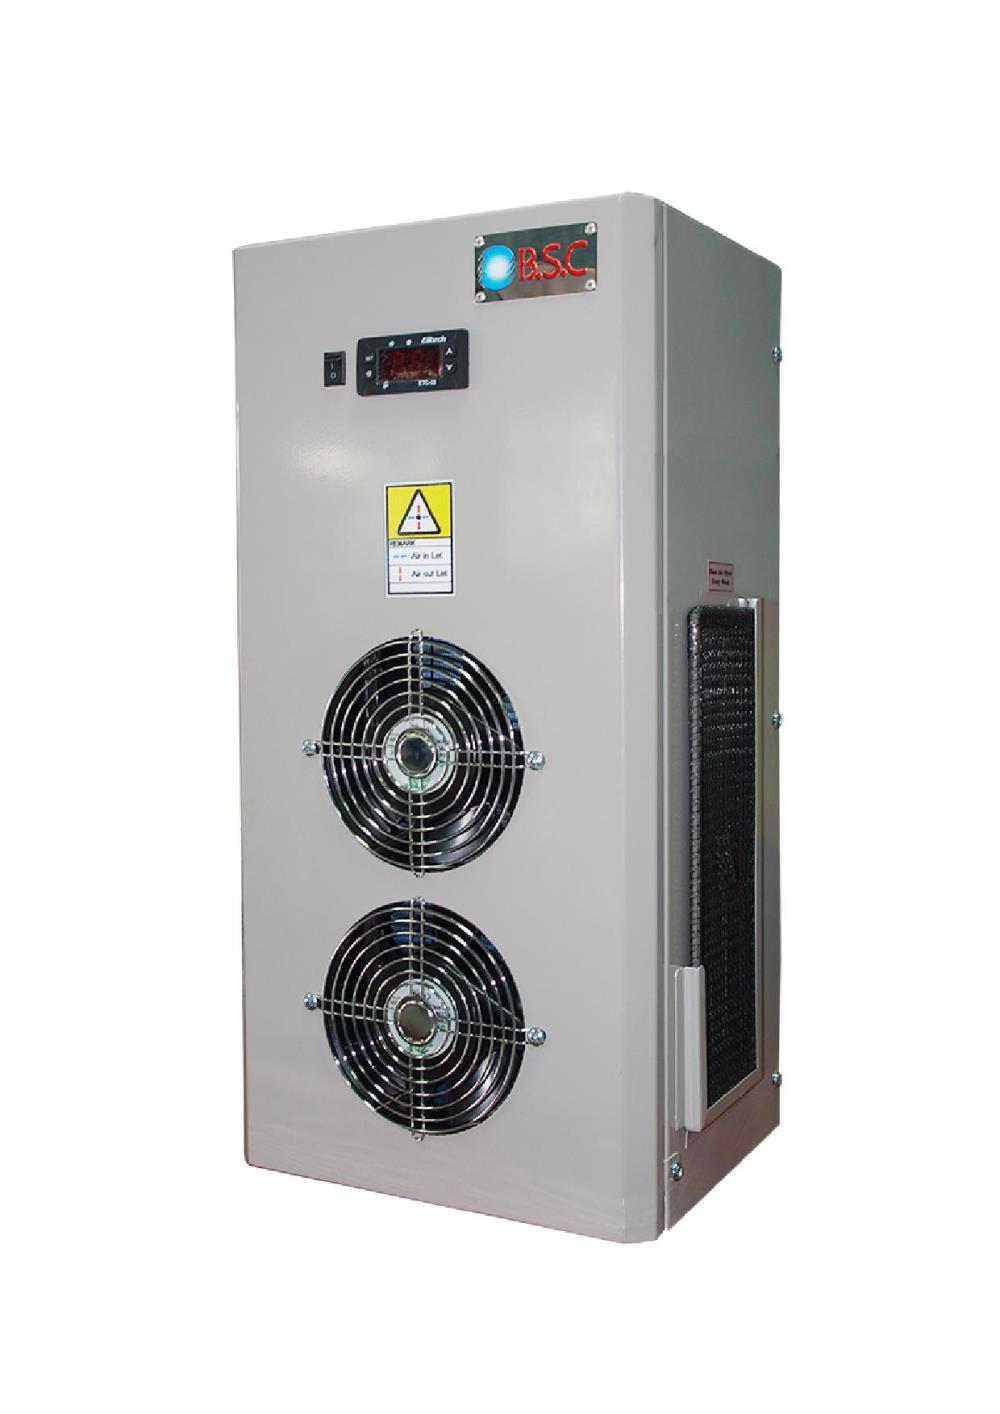 Air Condition : BSC850-C,แอร์ตู้คอนโทรล,BSC,Plant and Facility Equipment/HVAC/Air Conditioning